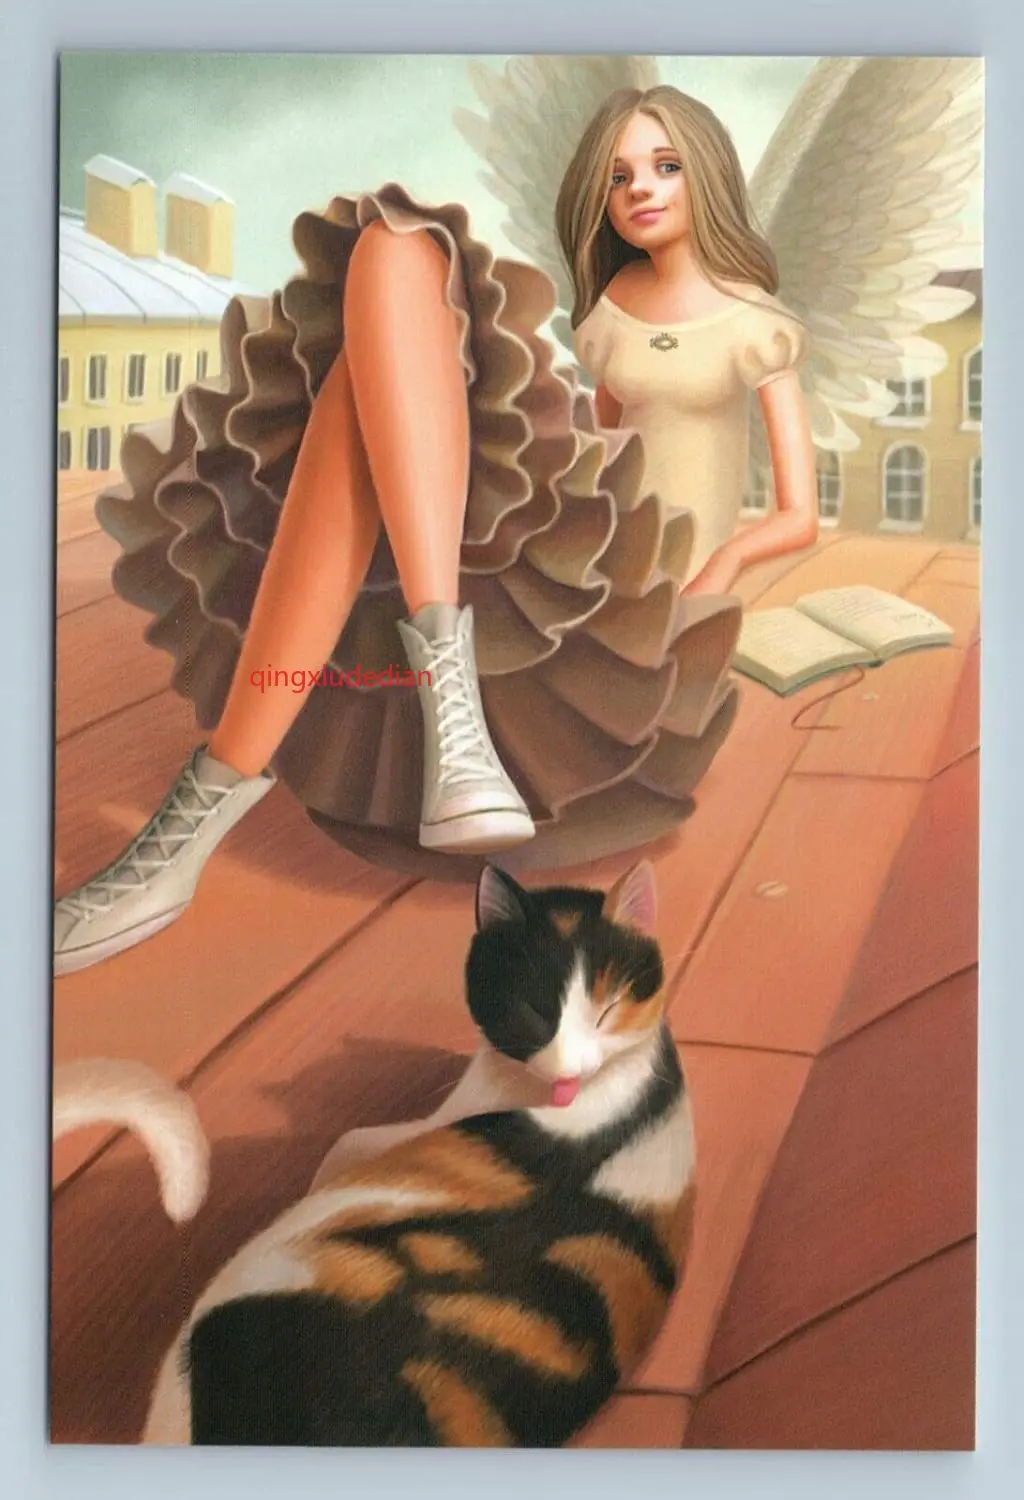 

Eeypy Tin Sign Wall Art Pretty Girl and Cat with Book on Roof Muse in City Fantasy Metal Wall Decoration